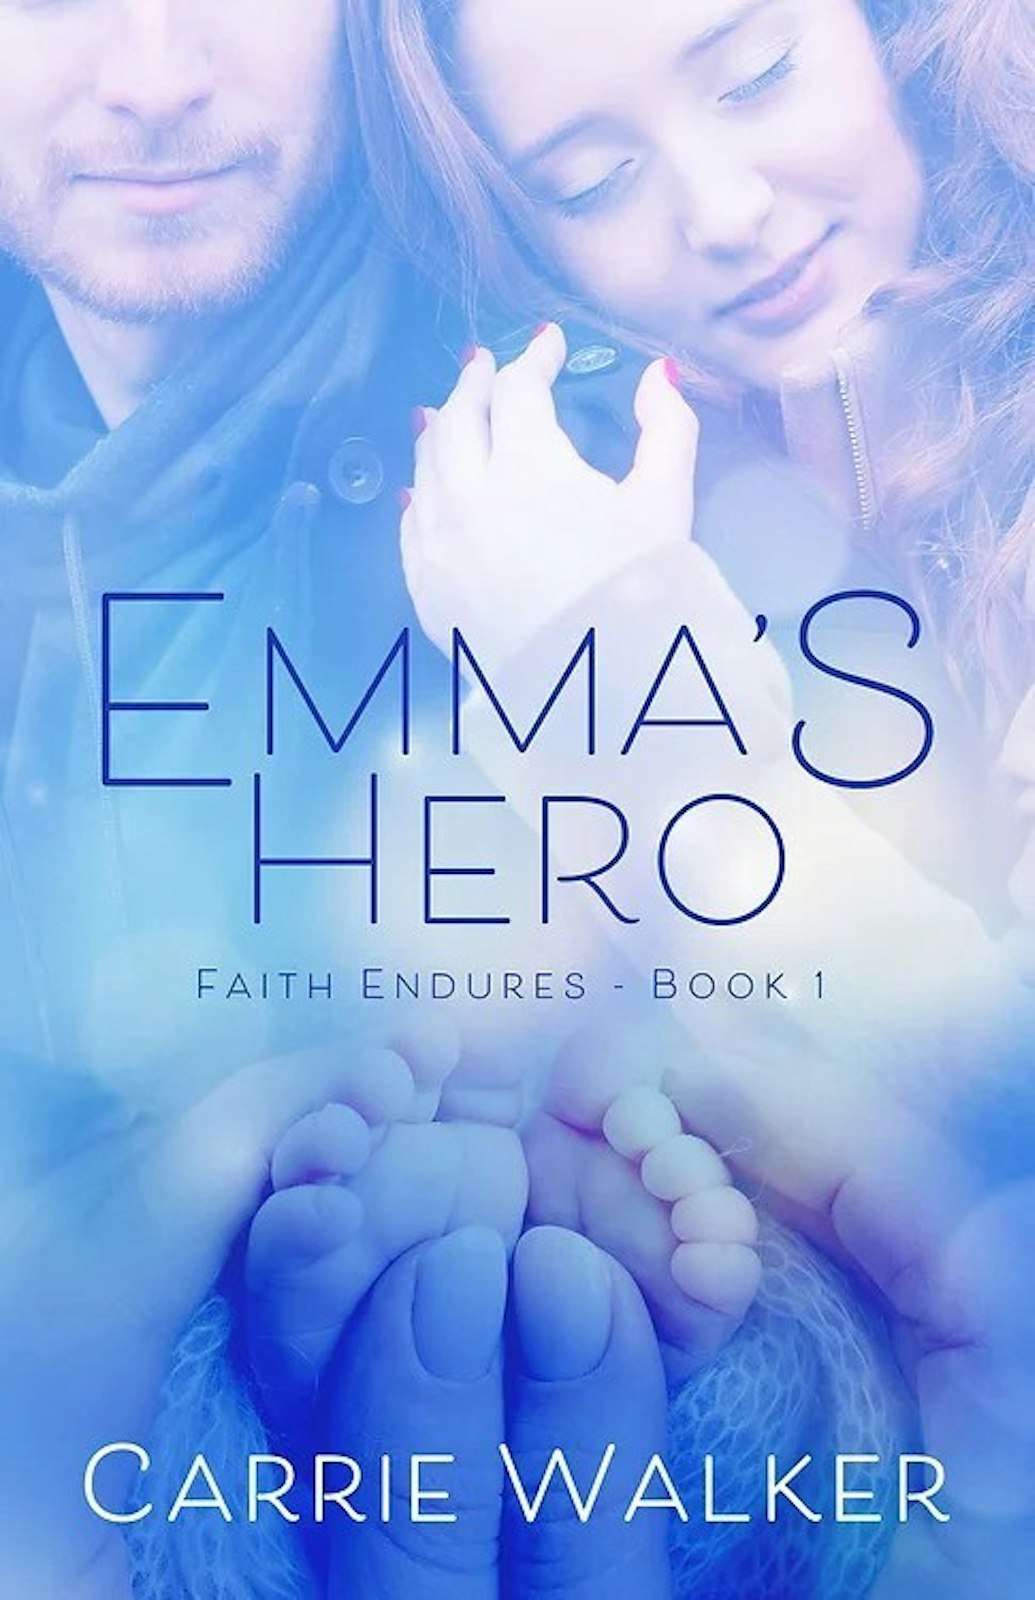 "Emma's Hero" is the first in a planned series, Walker said. The next book in the series is scheduled to be published in February 2025, and Walker is currently working on a third. (Photos courtesy of Carrie Walker)